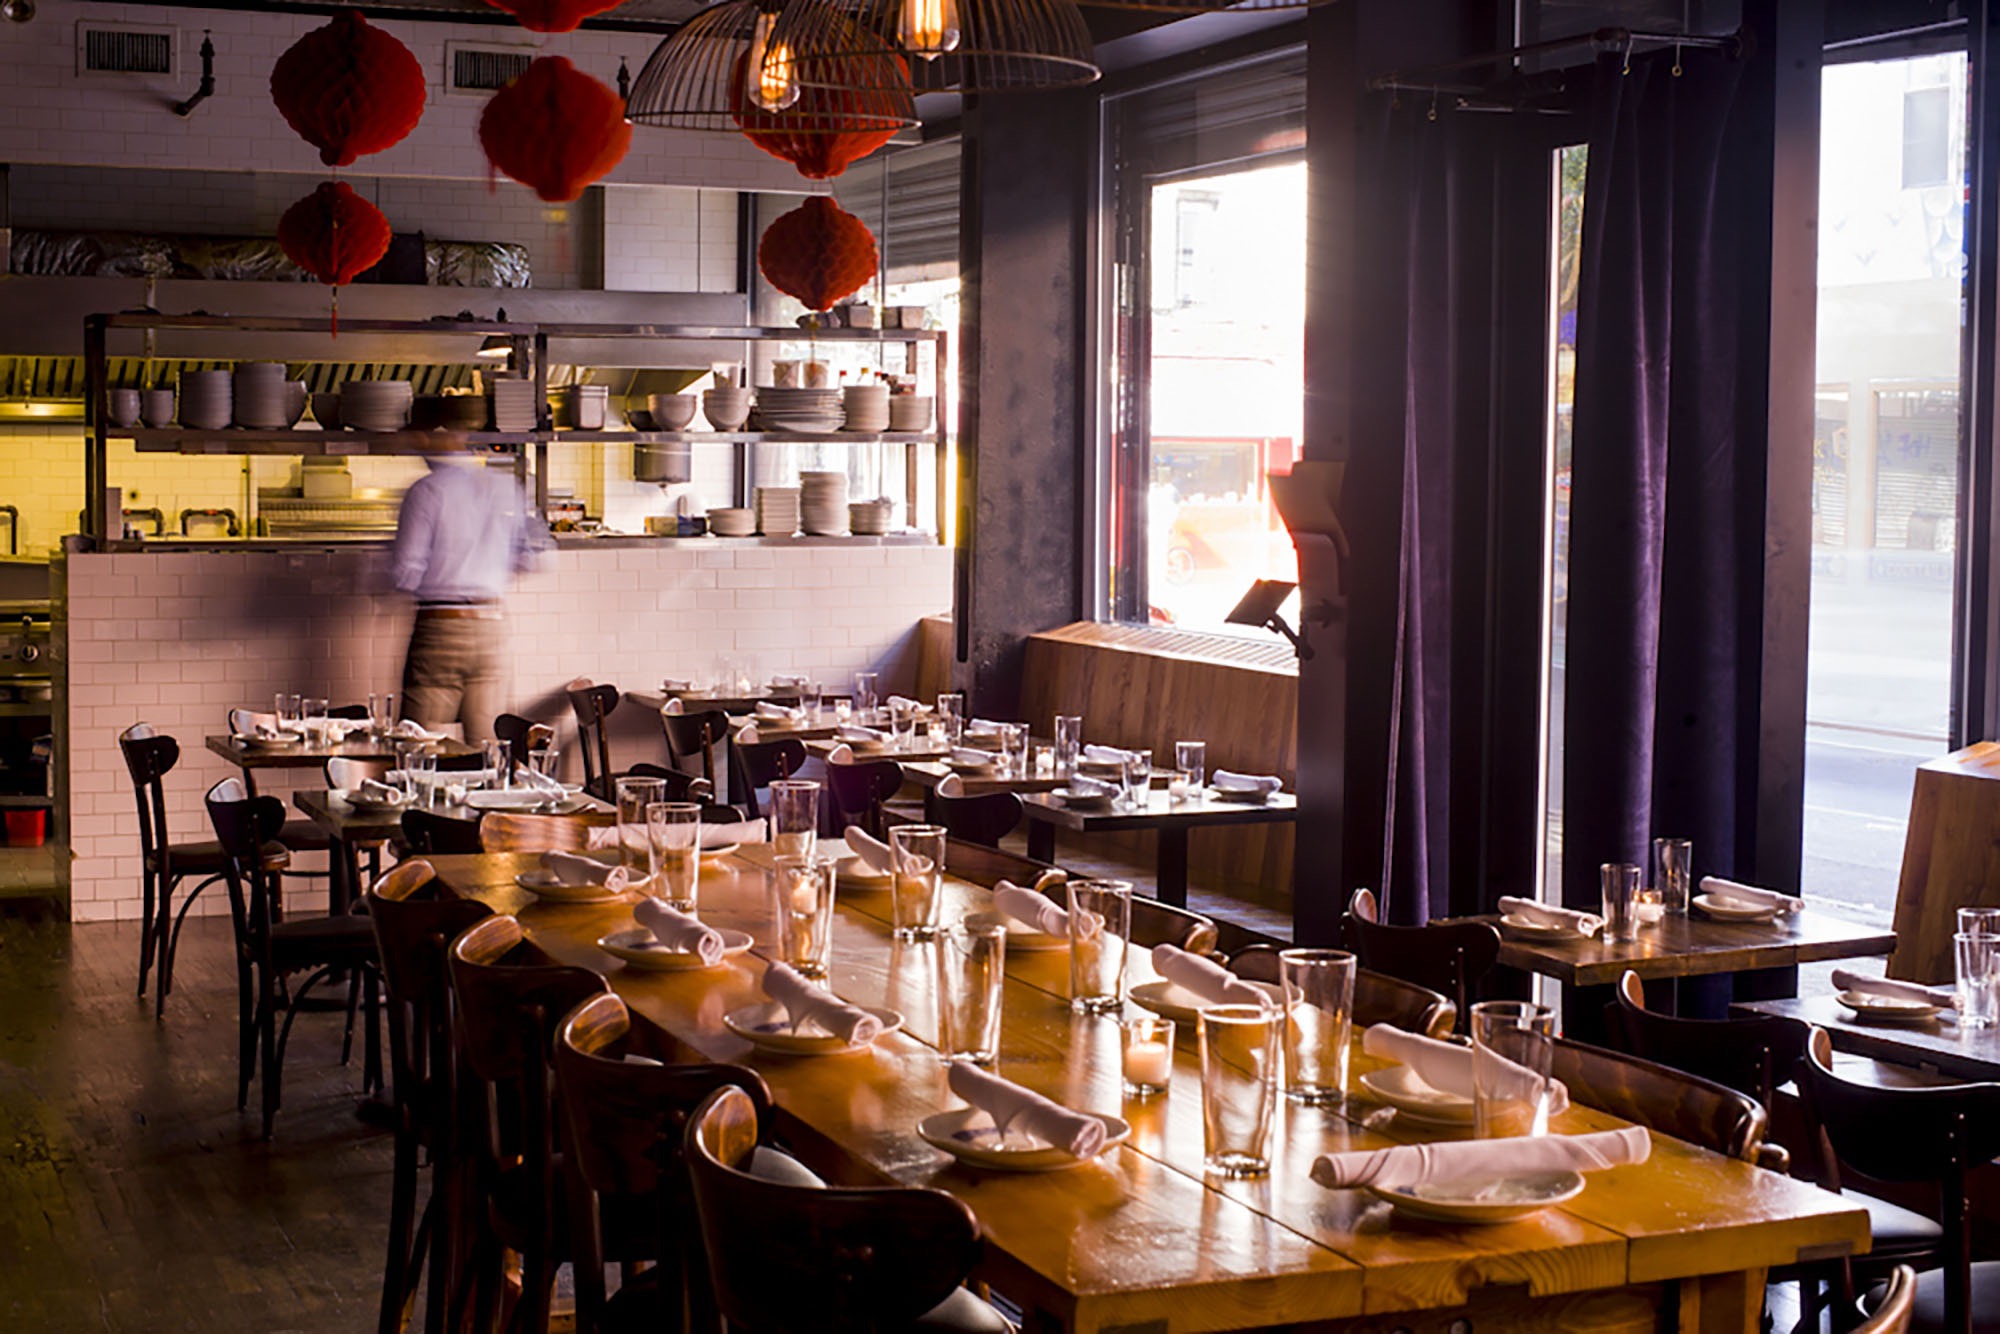 A waitor is setting the tables at an upscale chinese restaurant in the Lower East Side.